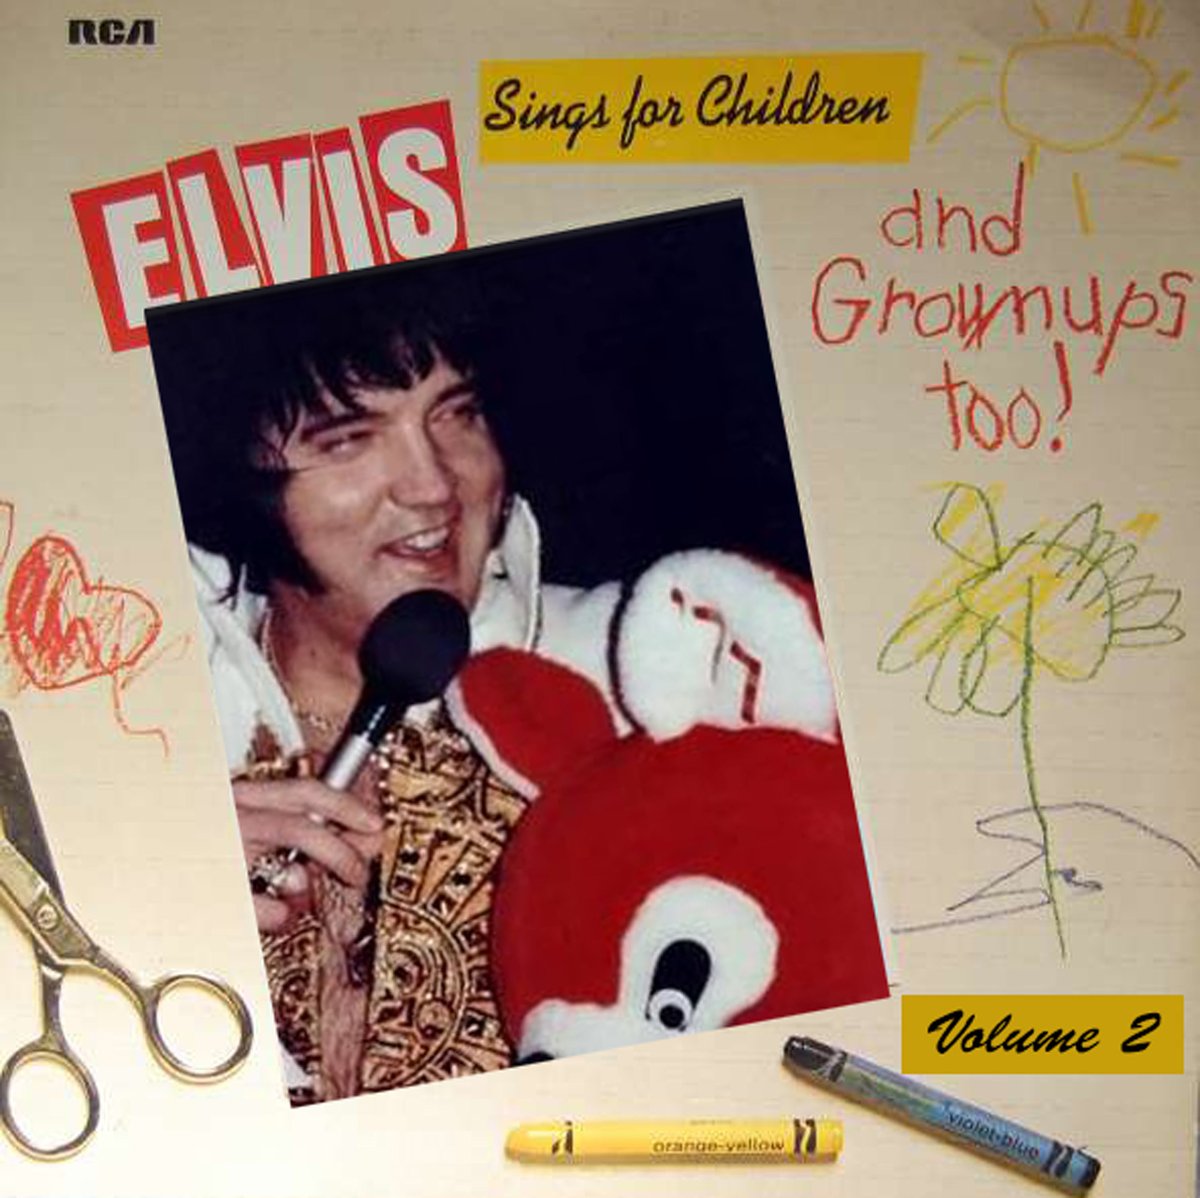 FTD has announced three new releases for next month. In an alternative universe a fourth release was added for a December release: Elvis Sings For Children And Grownups Too! elvistodayblog.com/2021/10/elvis-…